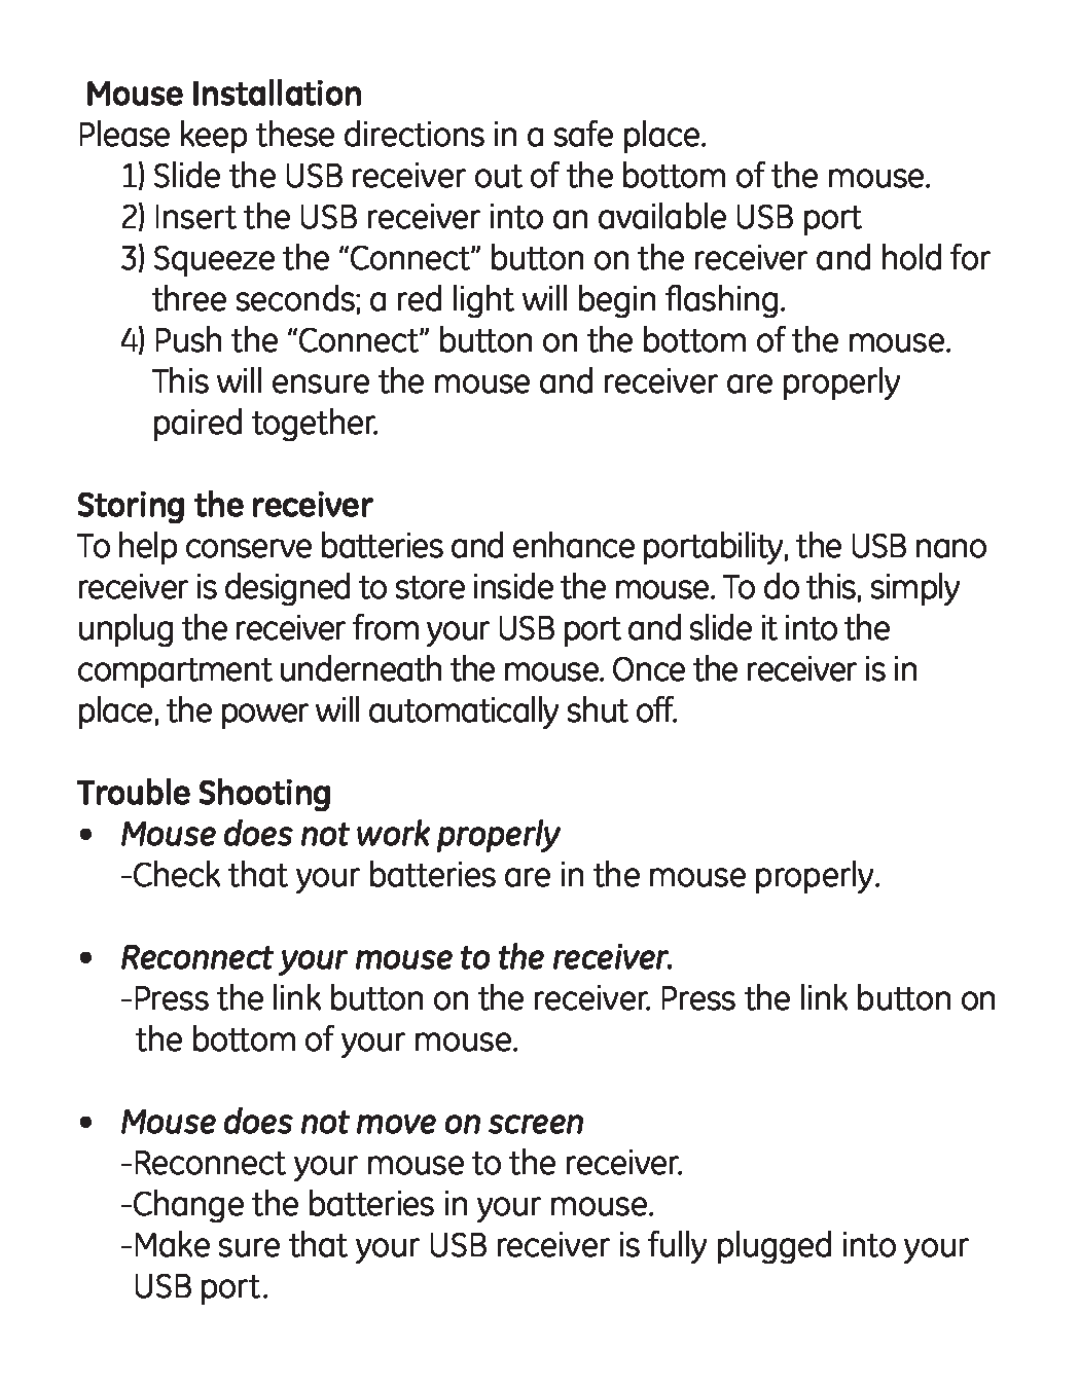 Jasco 98543 instruction manual Mouse Installation, Storing the receiver, Trouble Shooting, Mouse does not work properly 